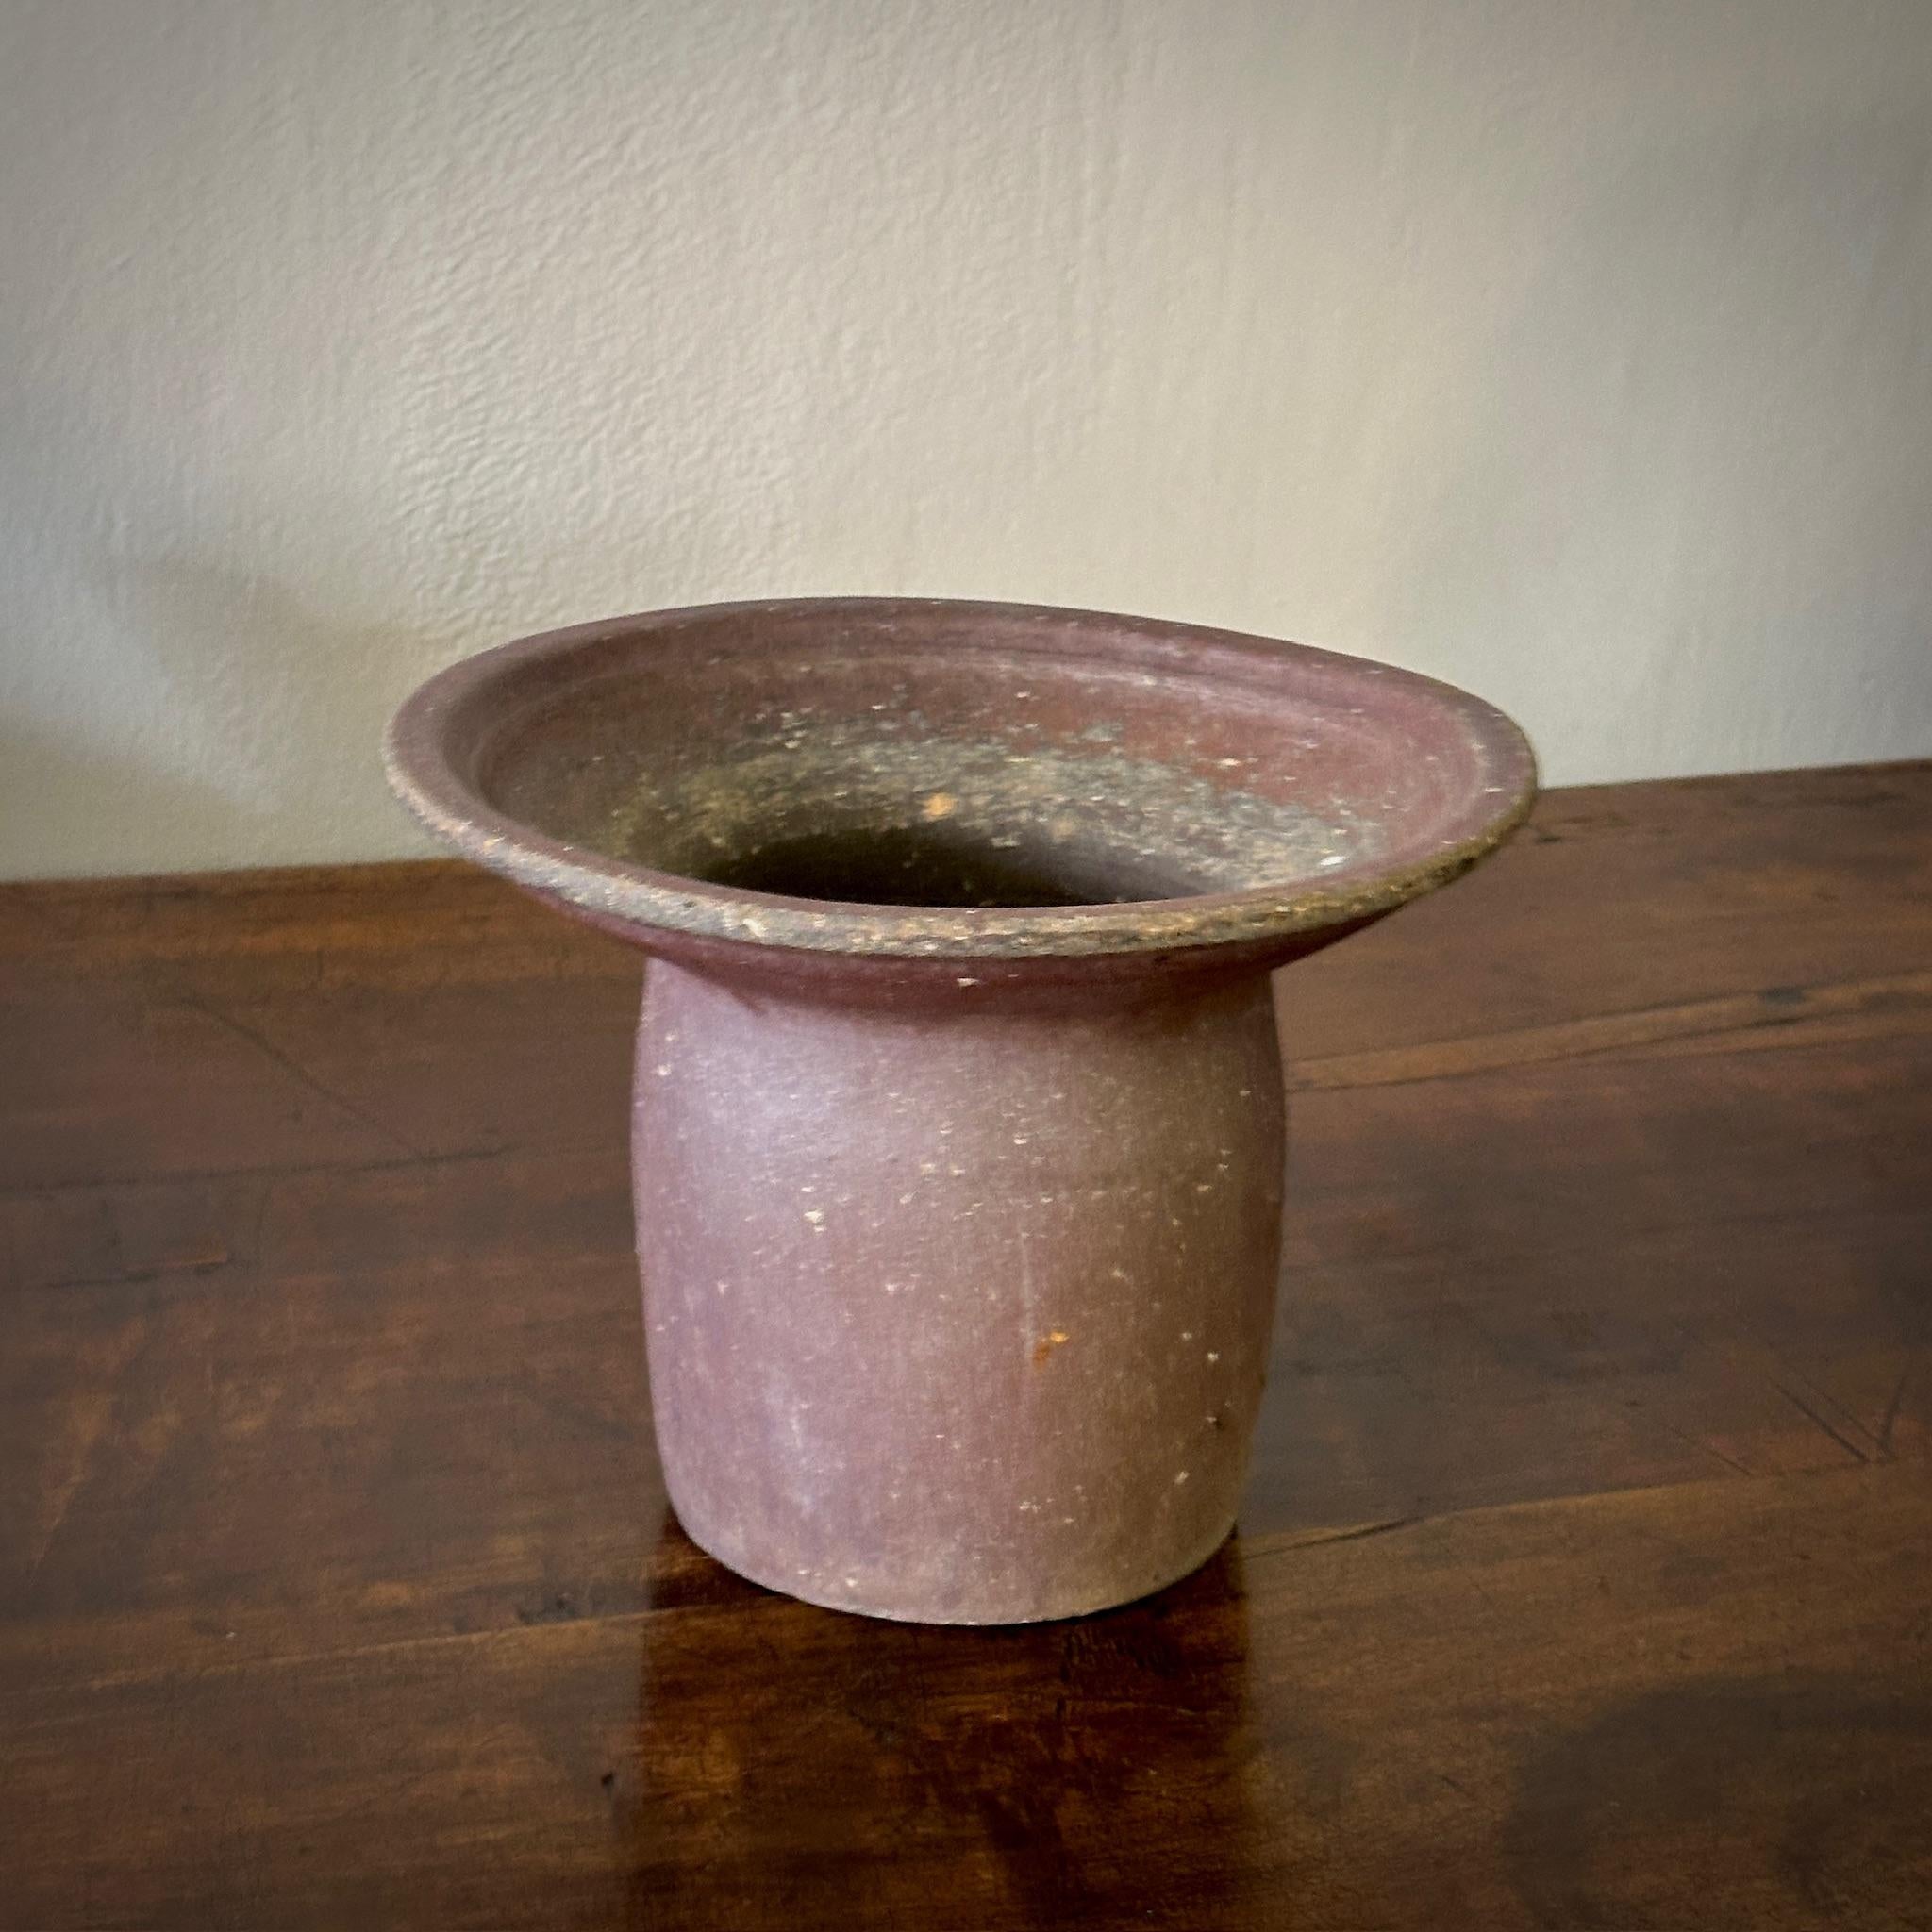 A Belgian glazed studio pot ceramic vessel or vase with an extended rim in terra cotta toned glazes. Functional on its own or as a statement displayed in a group with our collection of pottery vessels

Belgium, circa 1970

Dimensions: 10W x10D x 7.5H